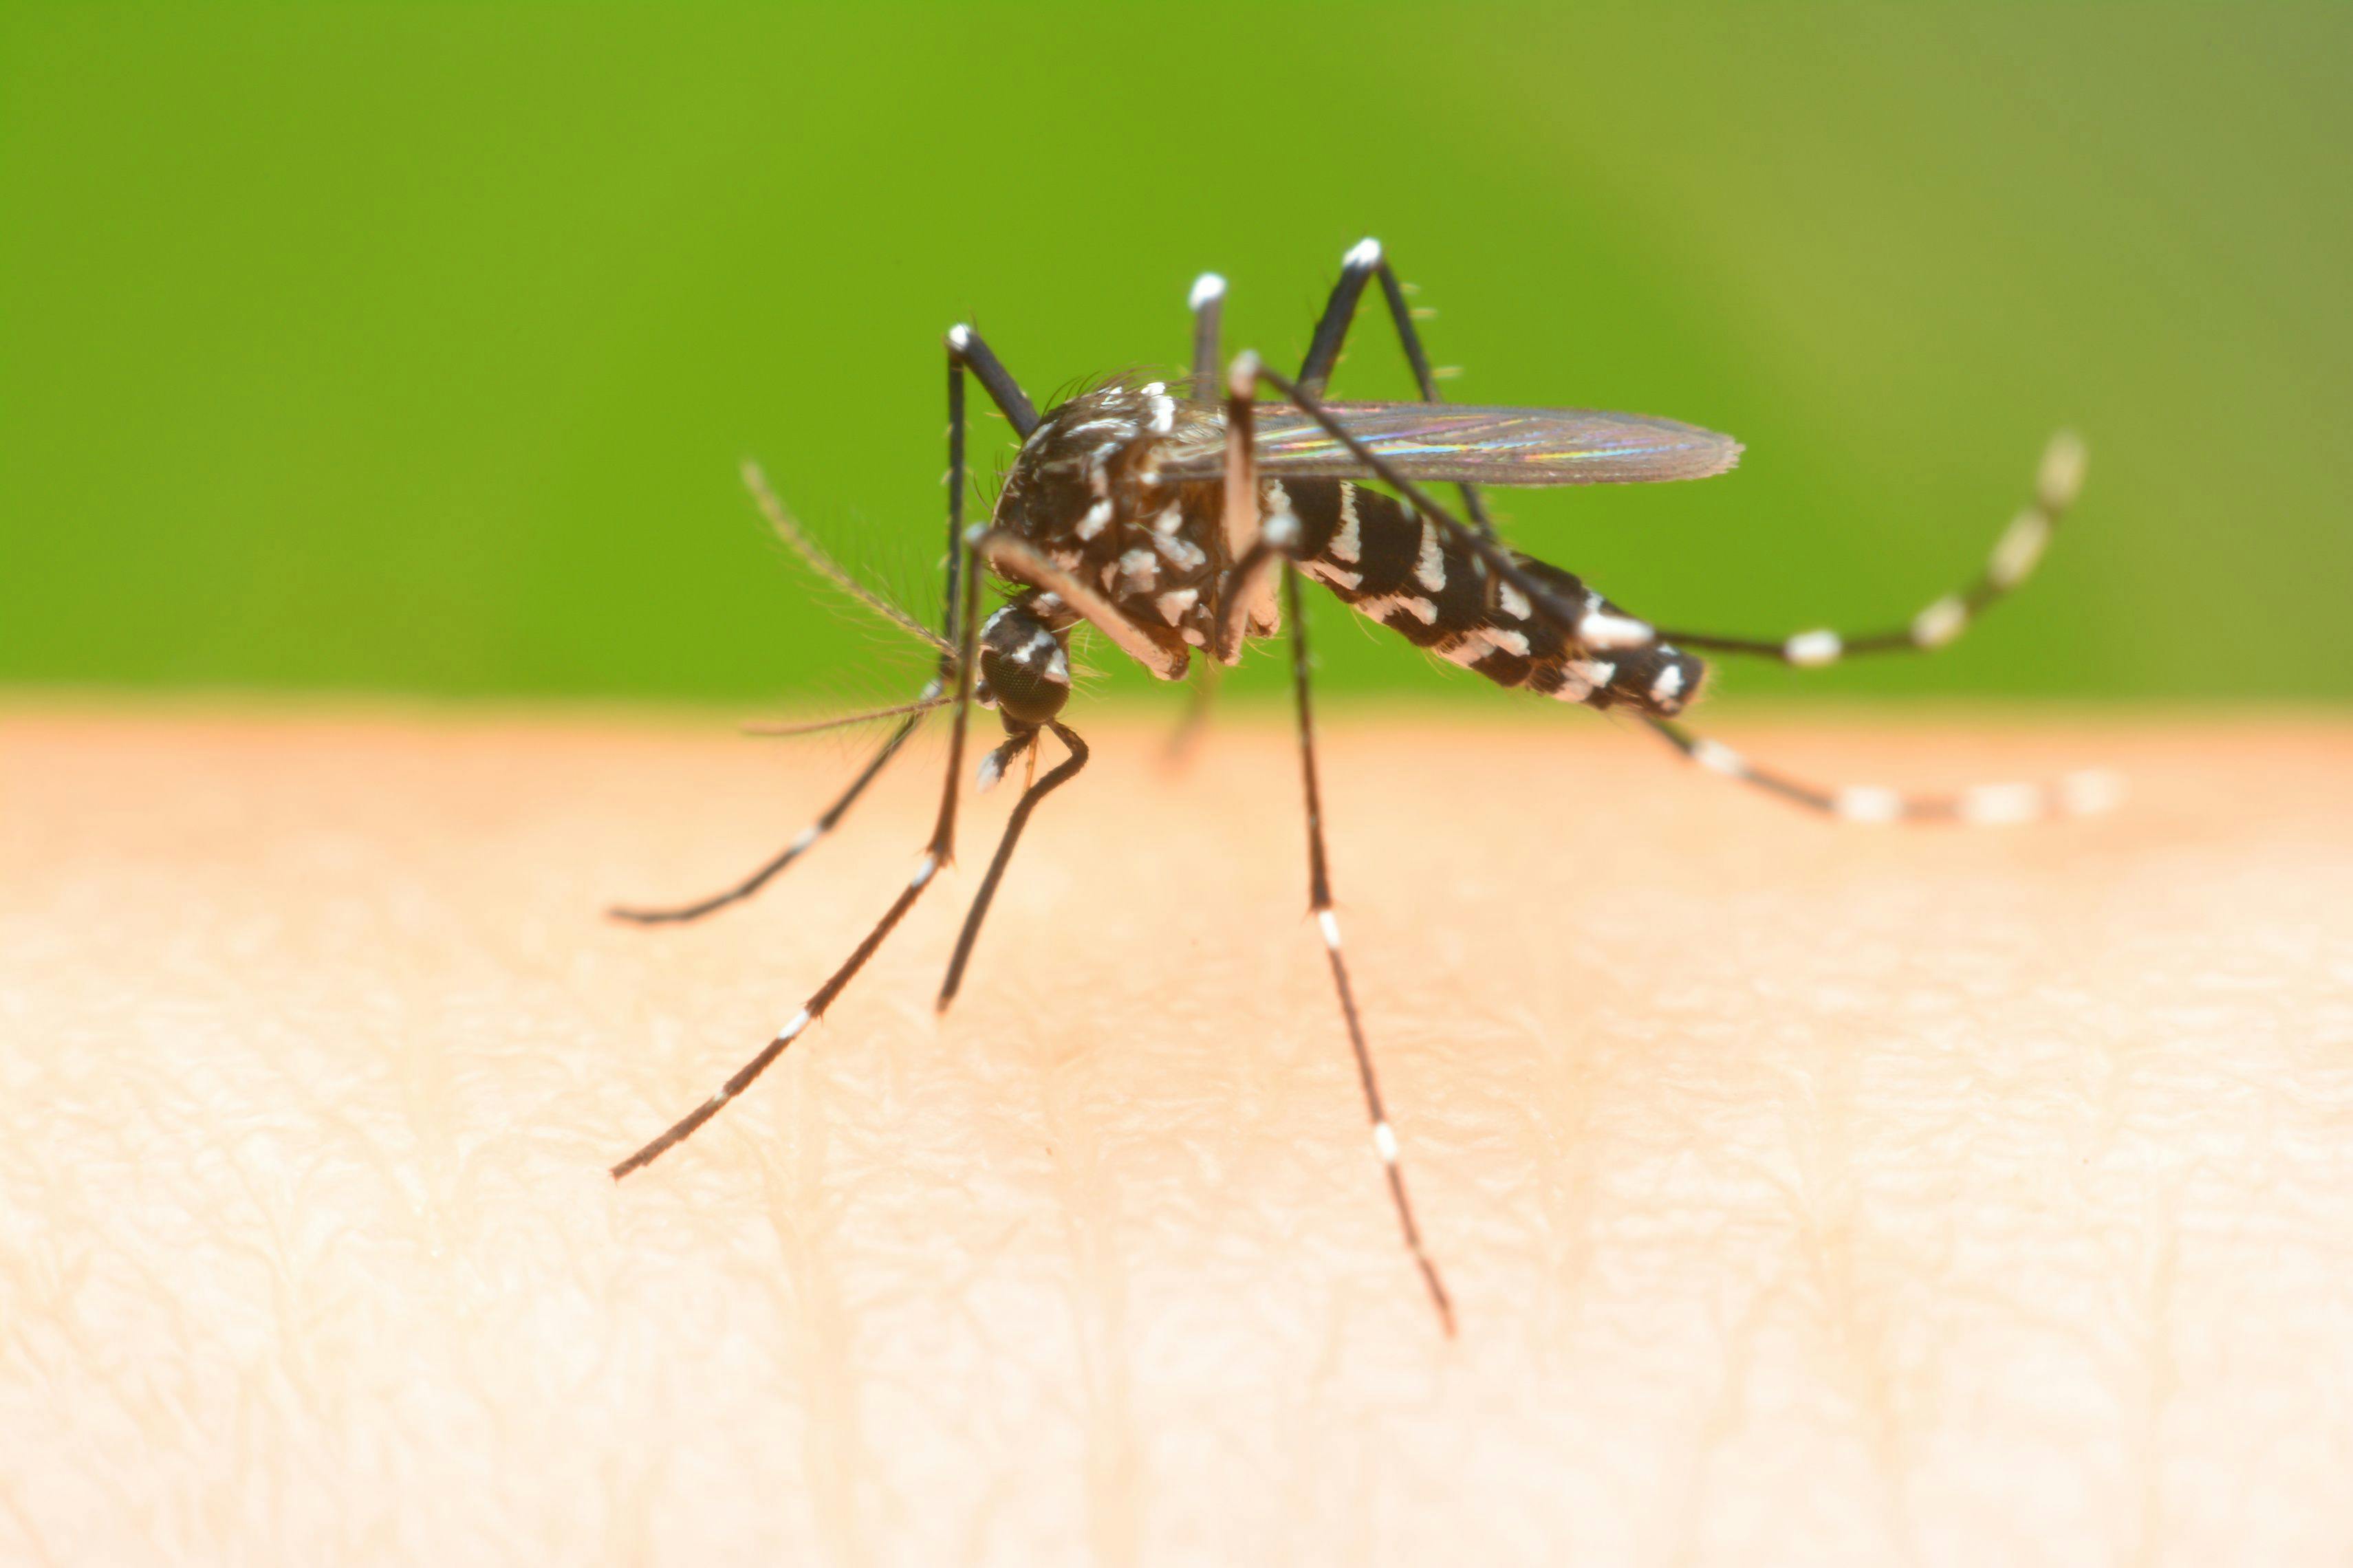 Salt-Based Mosquito-Control Products Are Ineffective